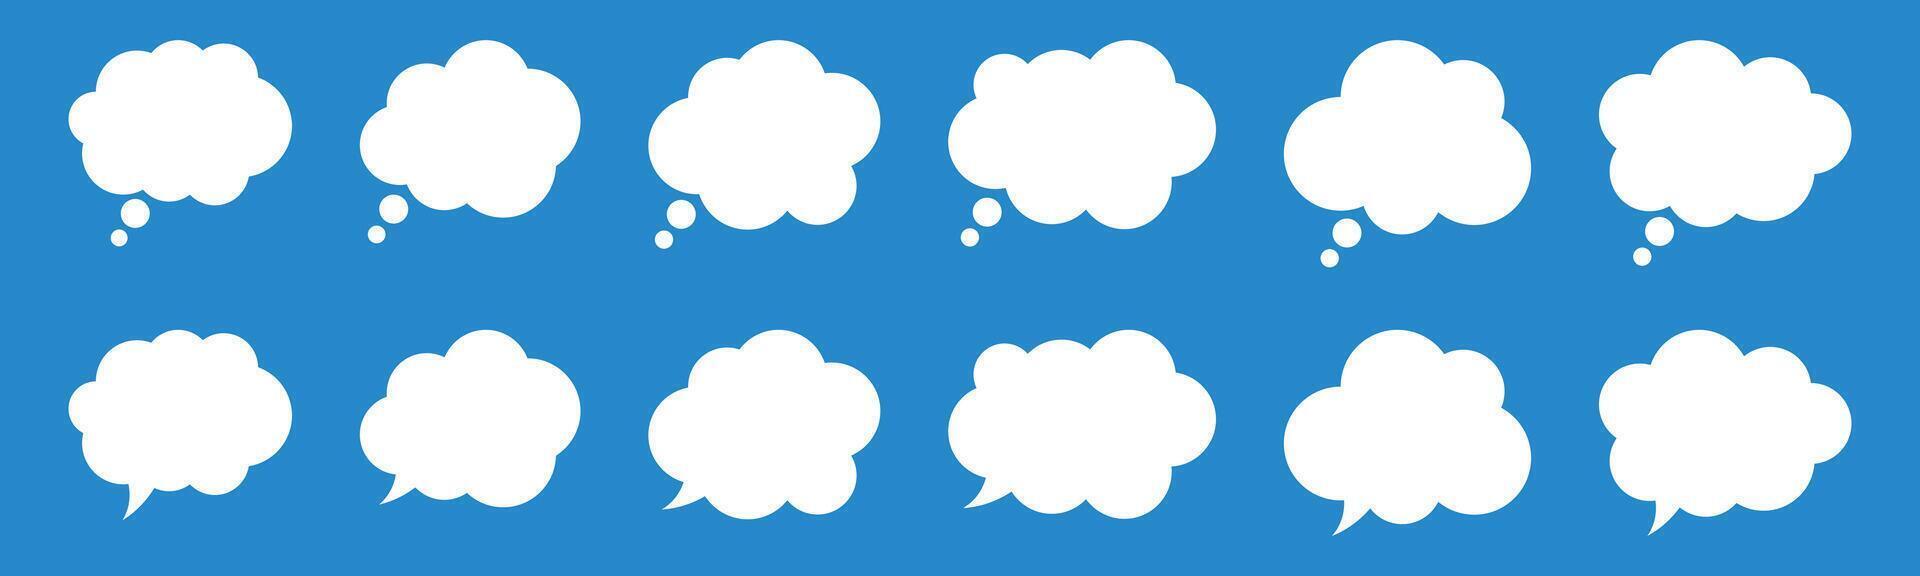 Thought bubble icon, thinking cloud icon for apps and websites. Set of speech bubbles. Speak bubble text, cartoon chatting box, message box. vector